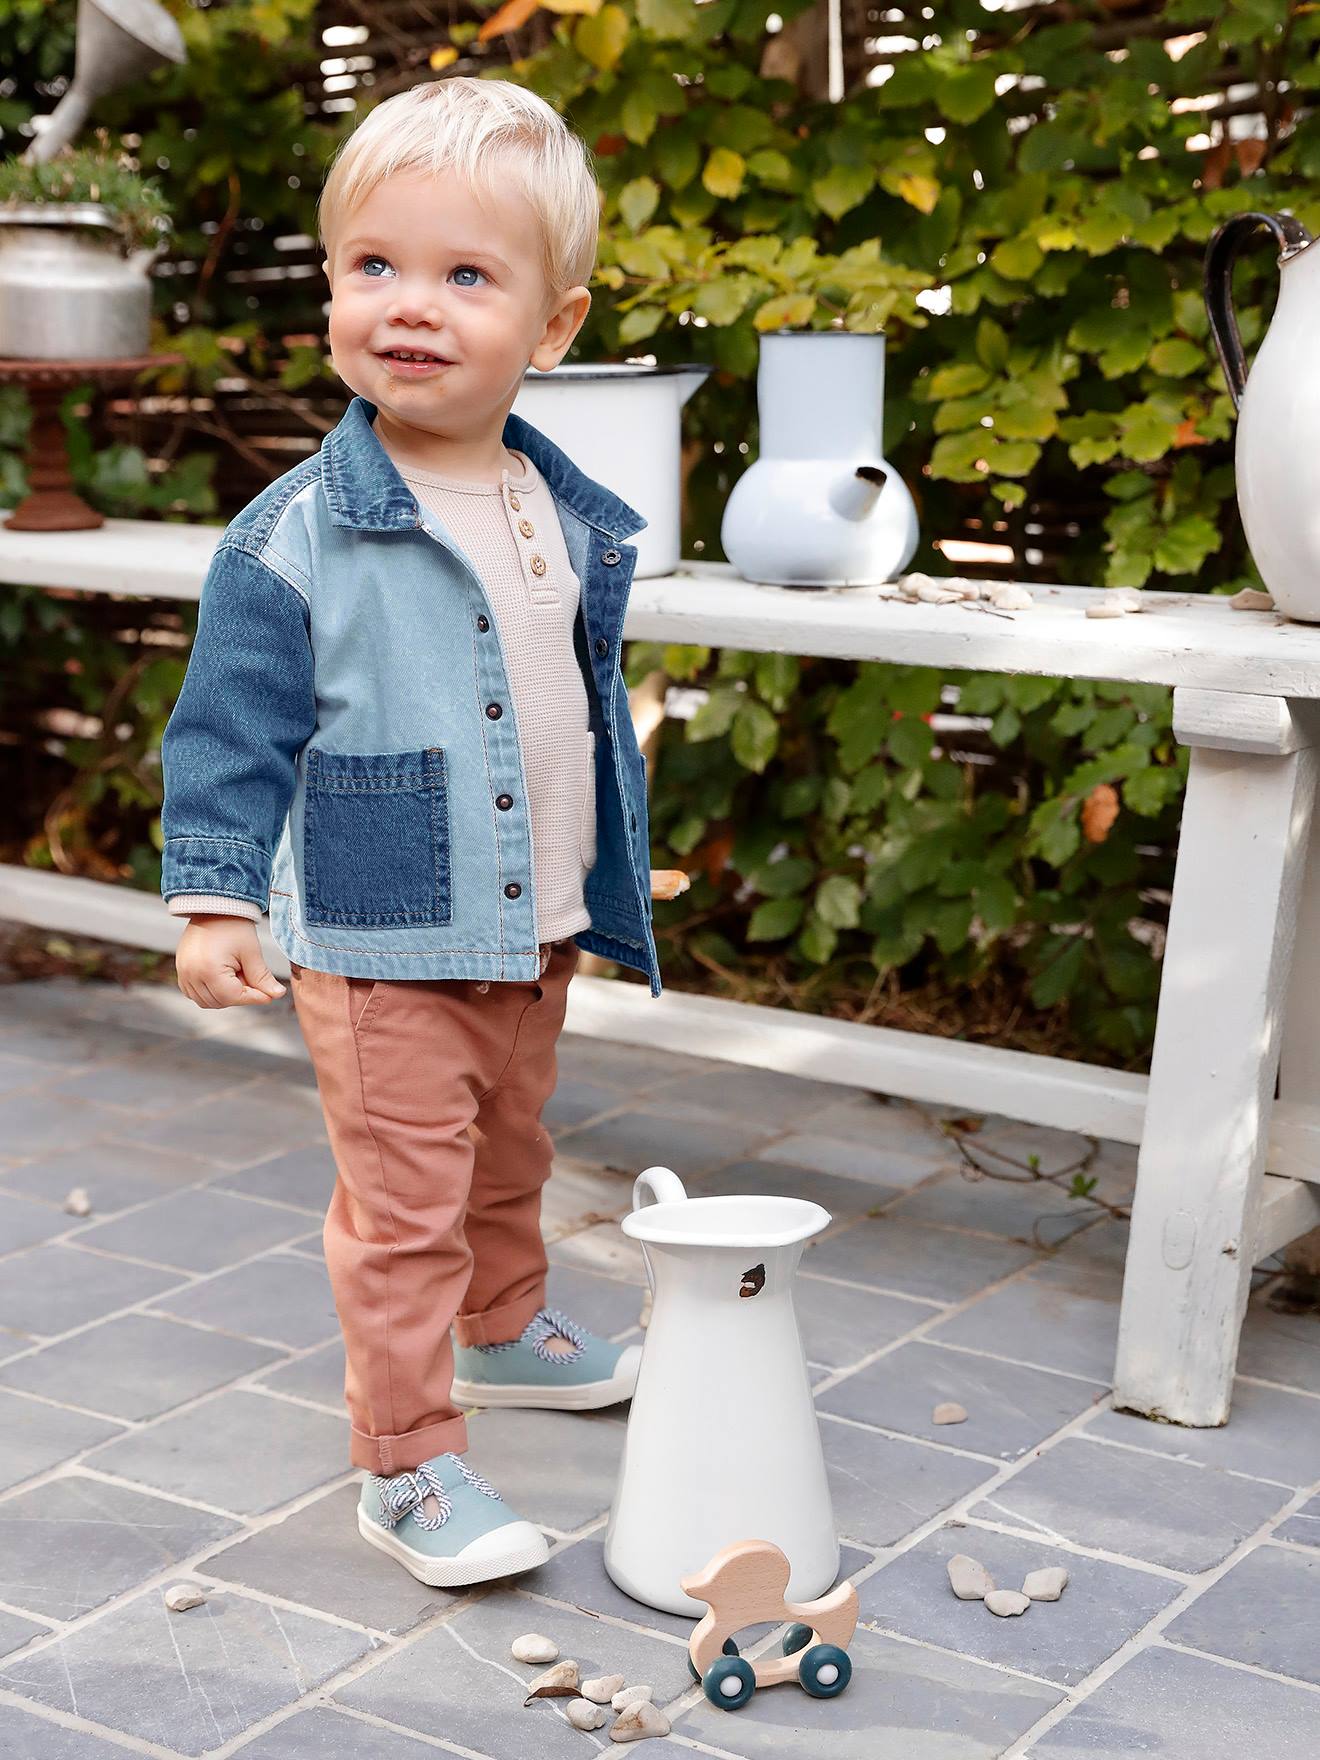 Buy Baby Boys Girls Denim Jacket Kids Toddler Button Down Hoodie Jeans  Jacket Top Coat Outwear, Blue, 12-18 Months at Amazon.in